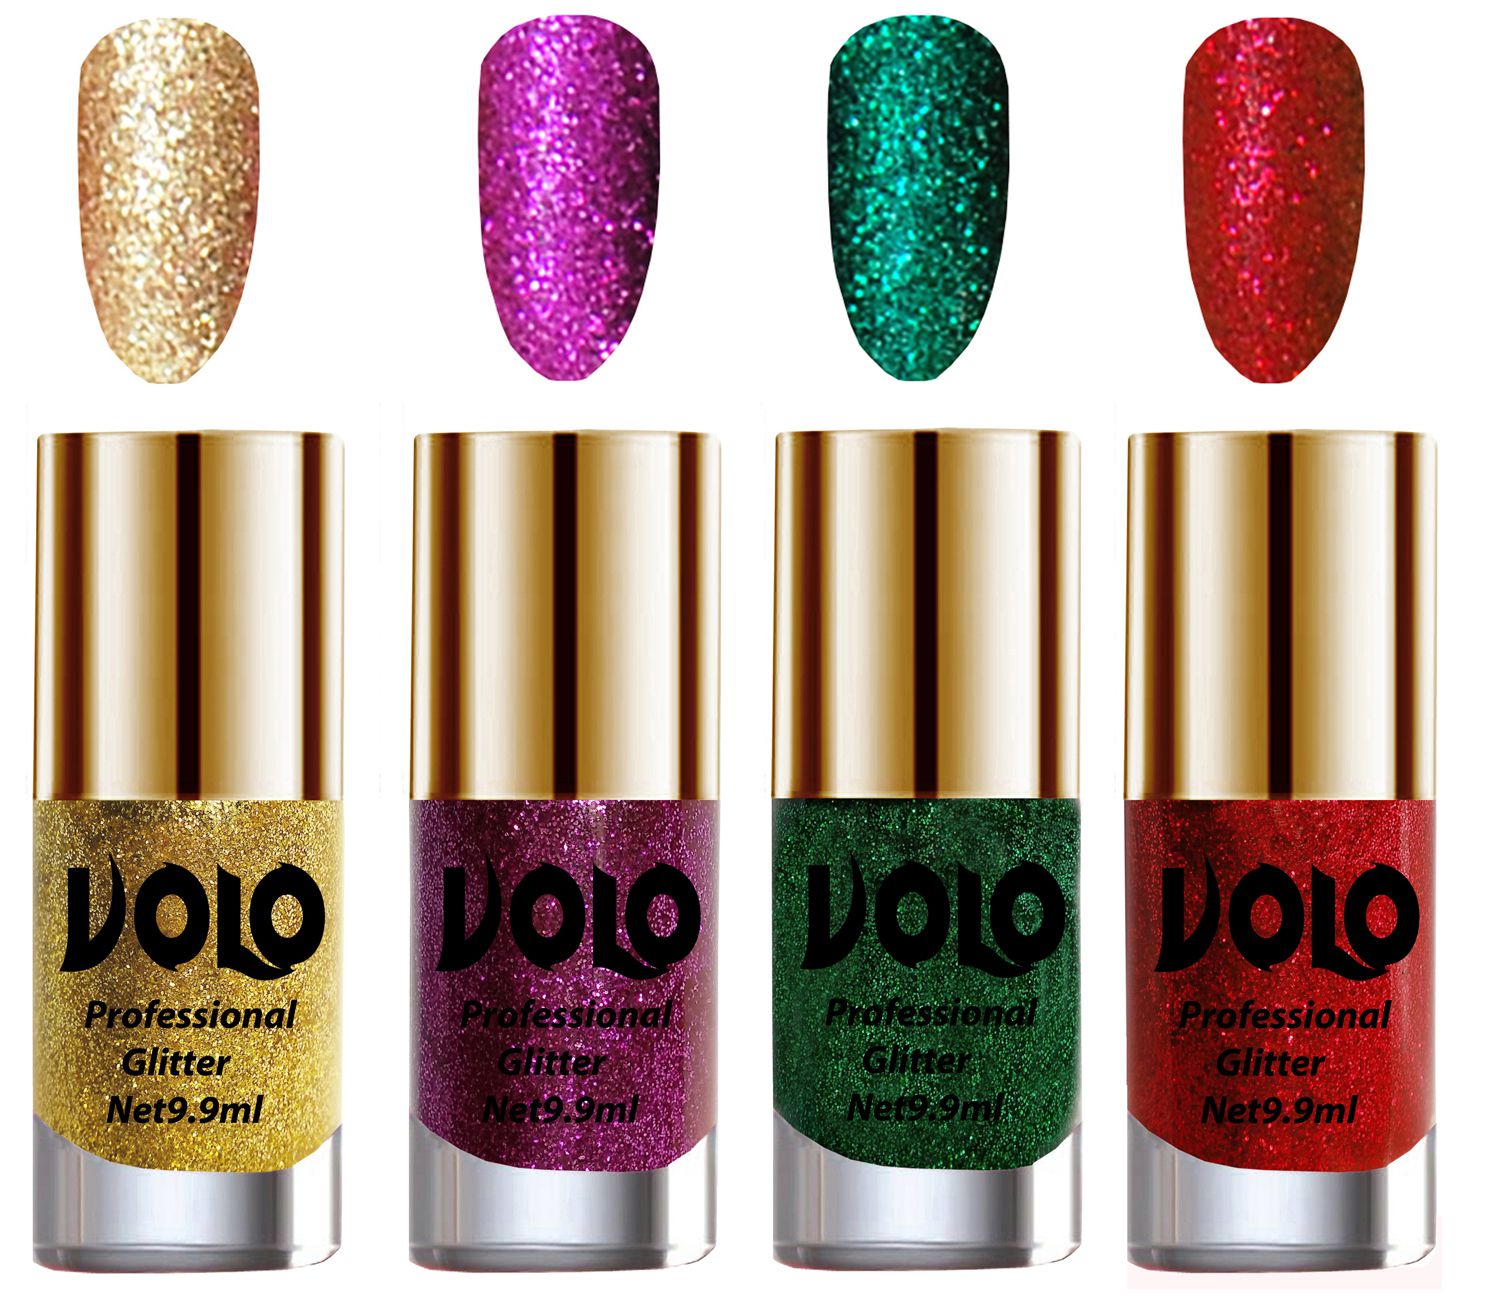     			VOLO Professionally Used Glitter Shine Nail Polish Gold,Purple,Green Red Pack of 4 39 mL